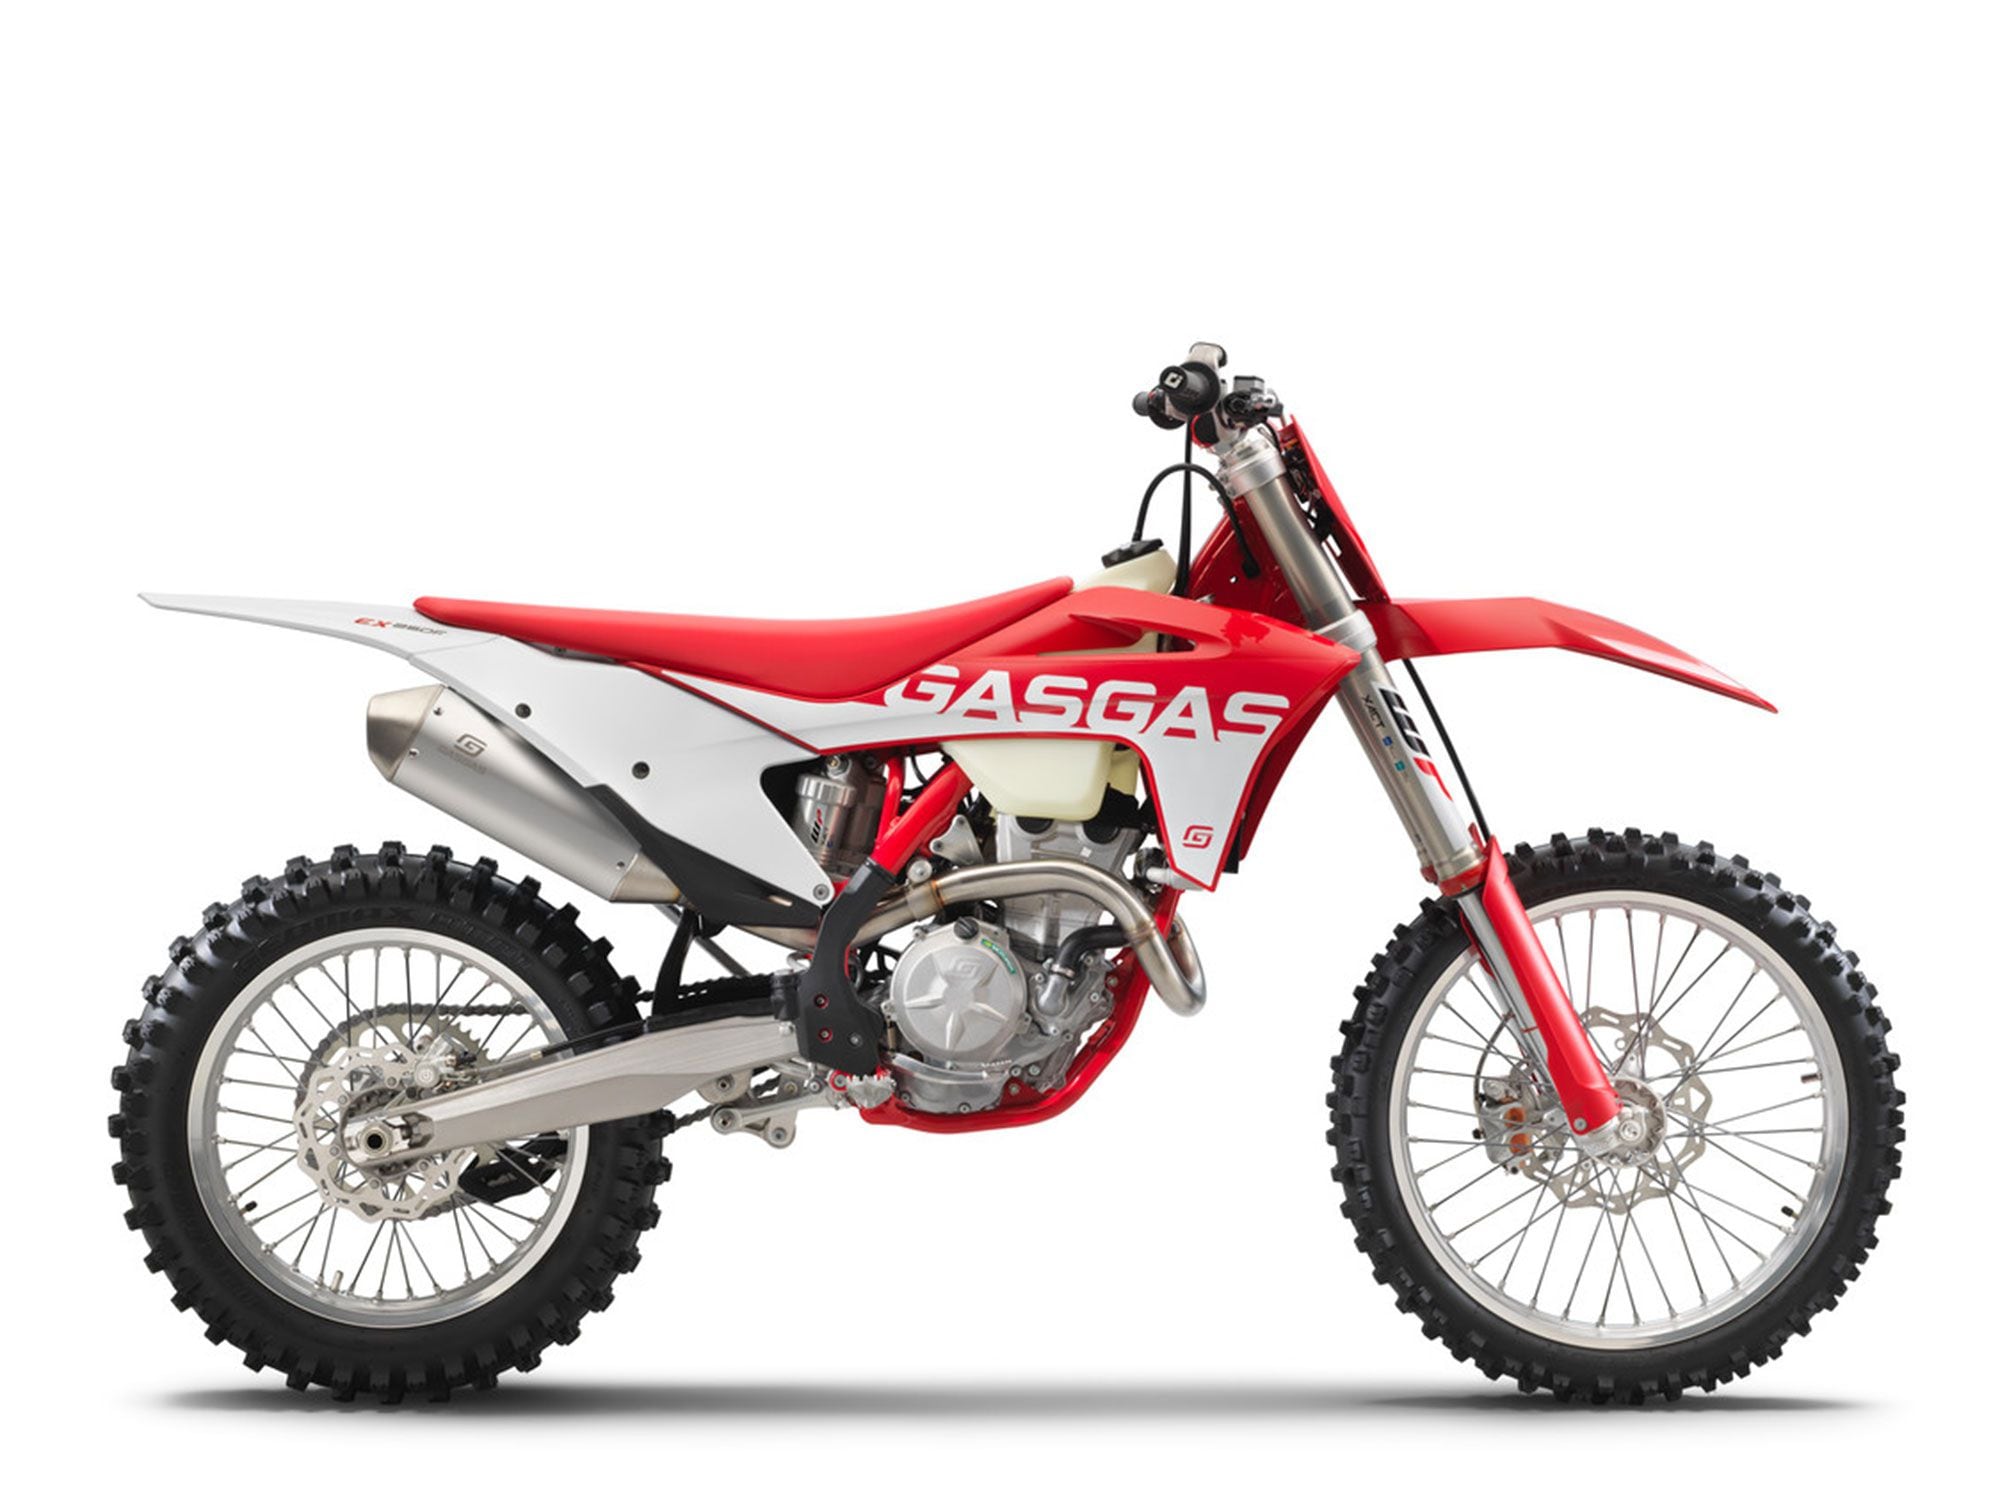 2021 GasGas EX 250F Buyer's Guide: Specs, Photos, Price | Cycle World